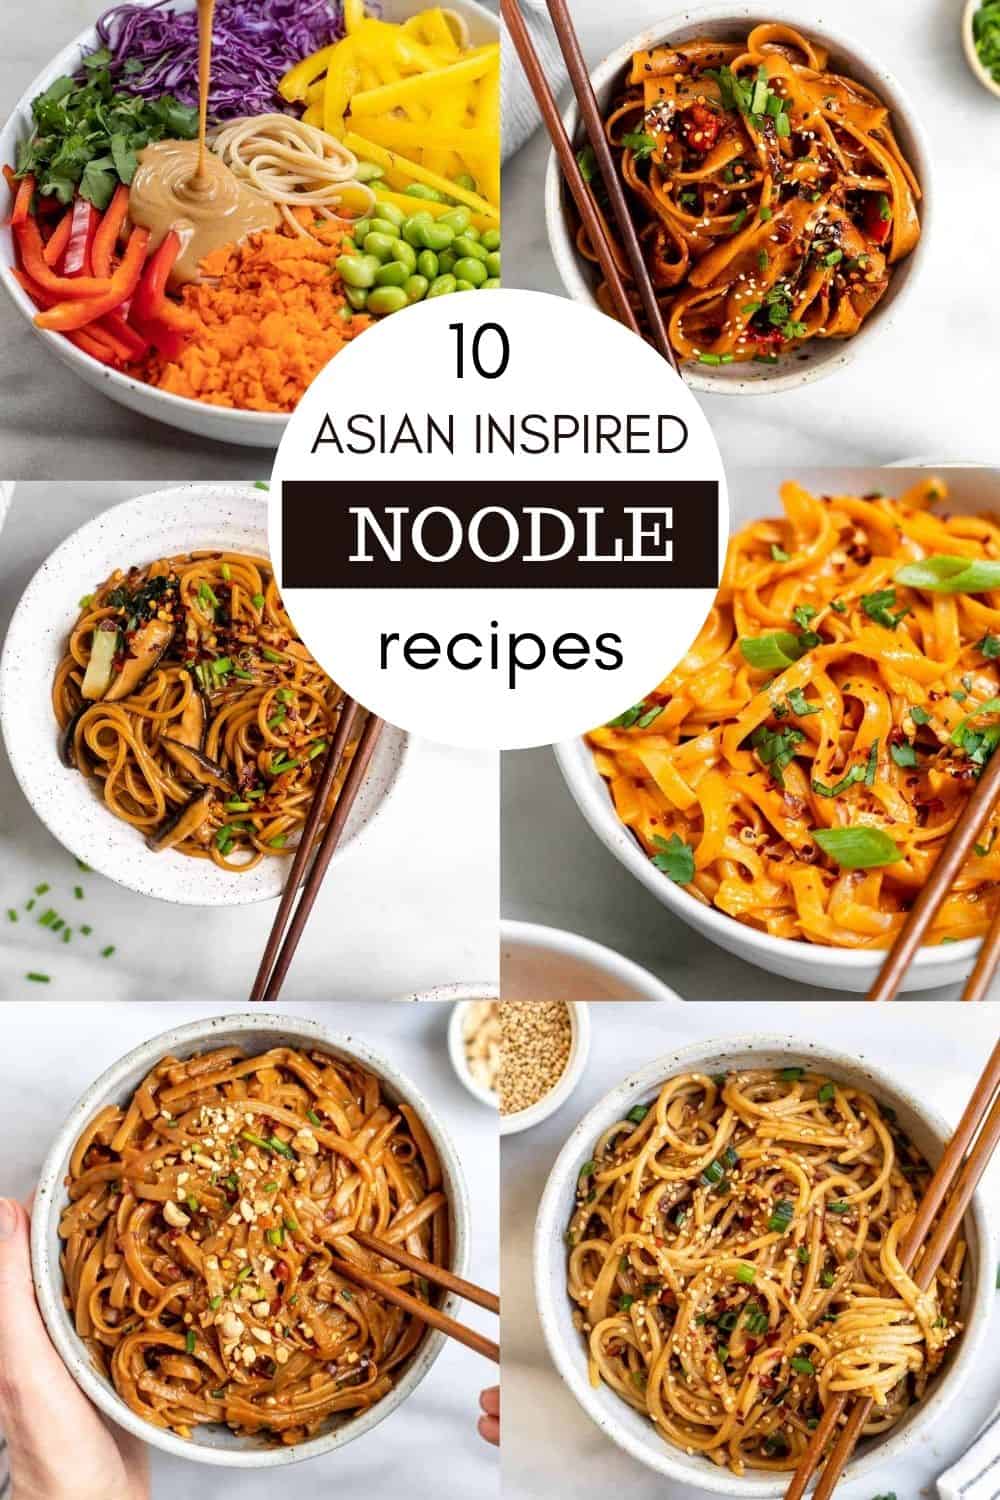 10 Asian Inspired Noodle Recipes - Eat With Clarity